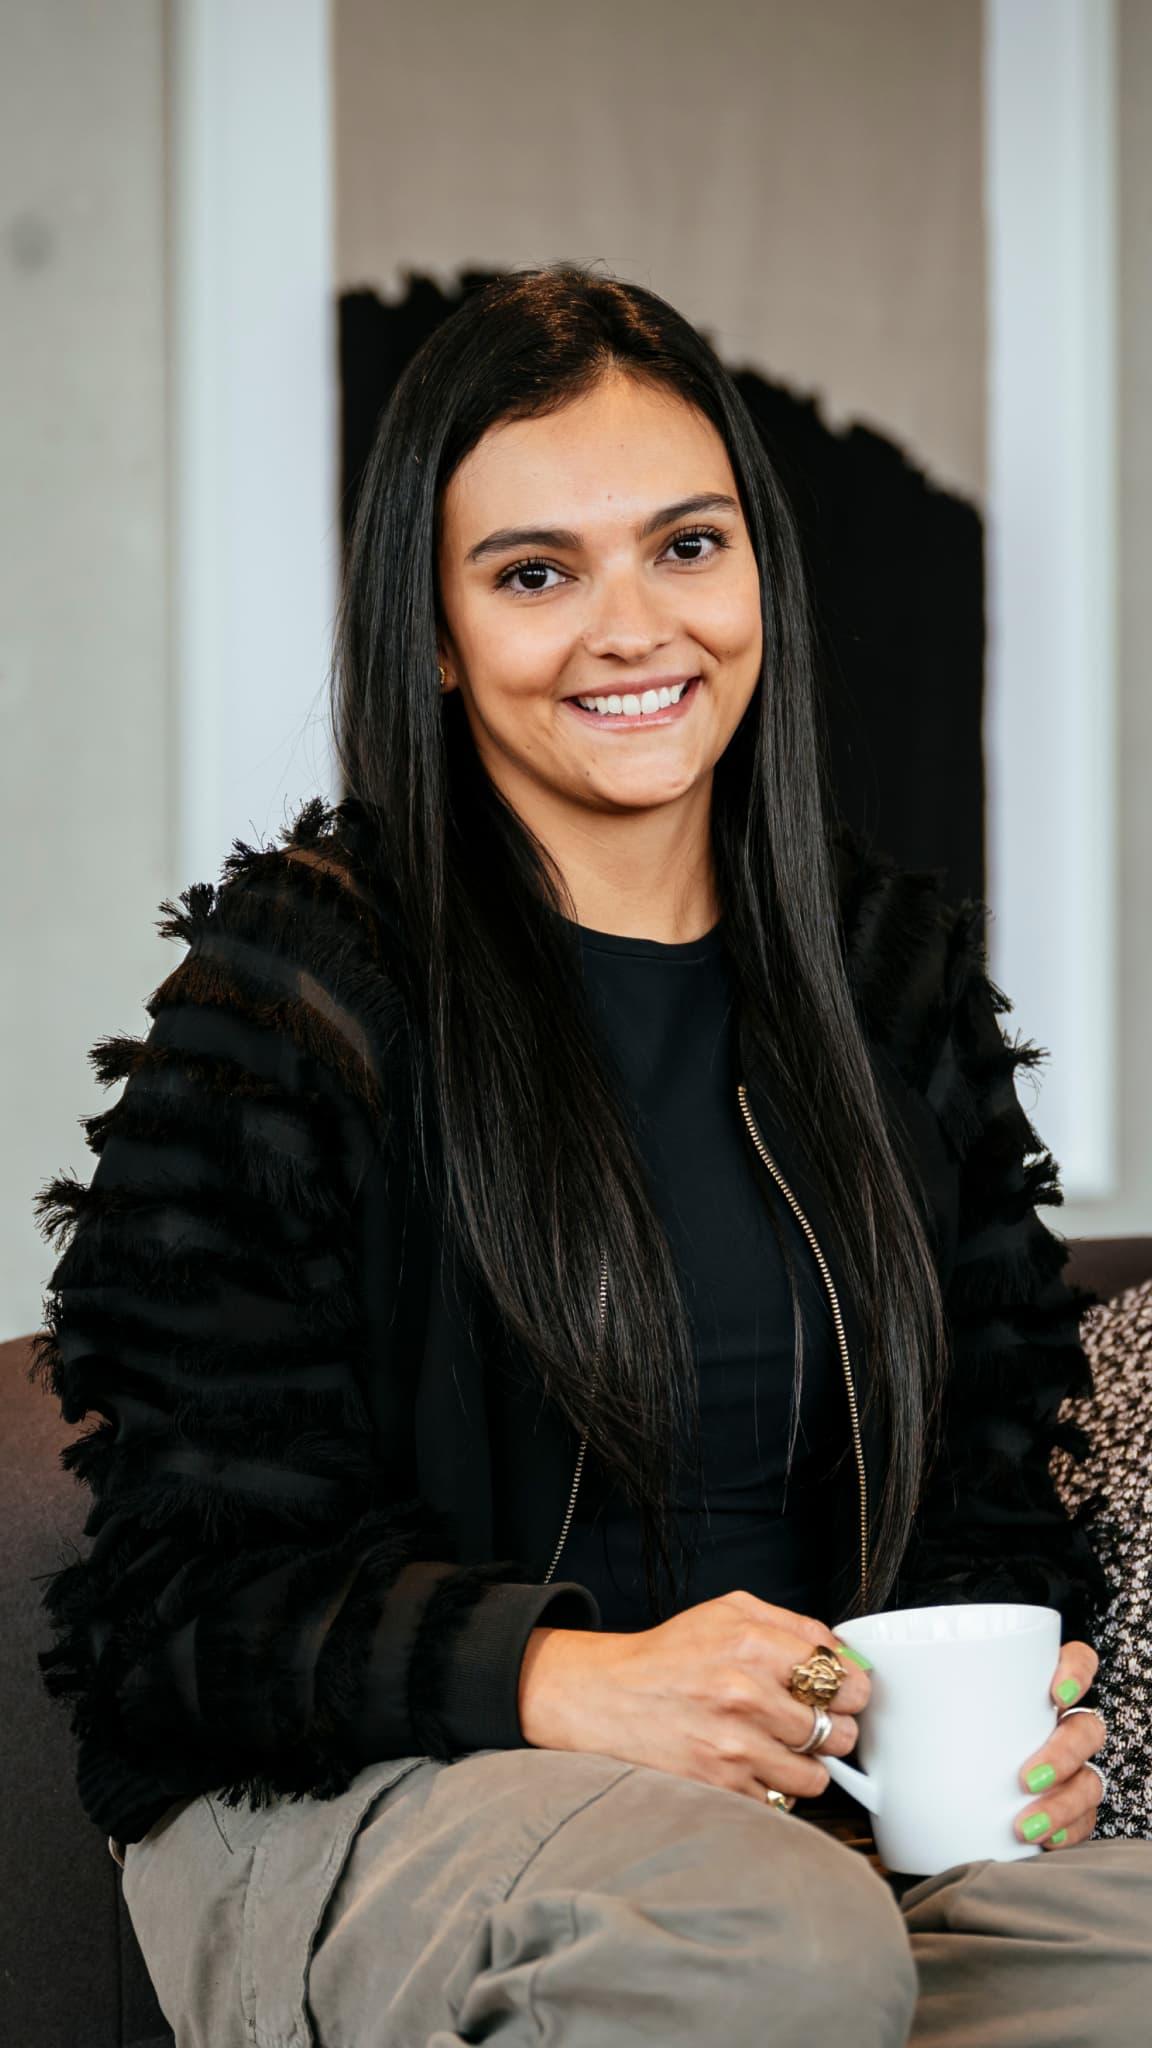 A woman looking at the camera smiling.